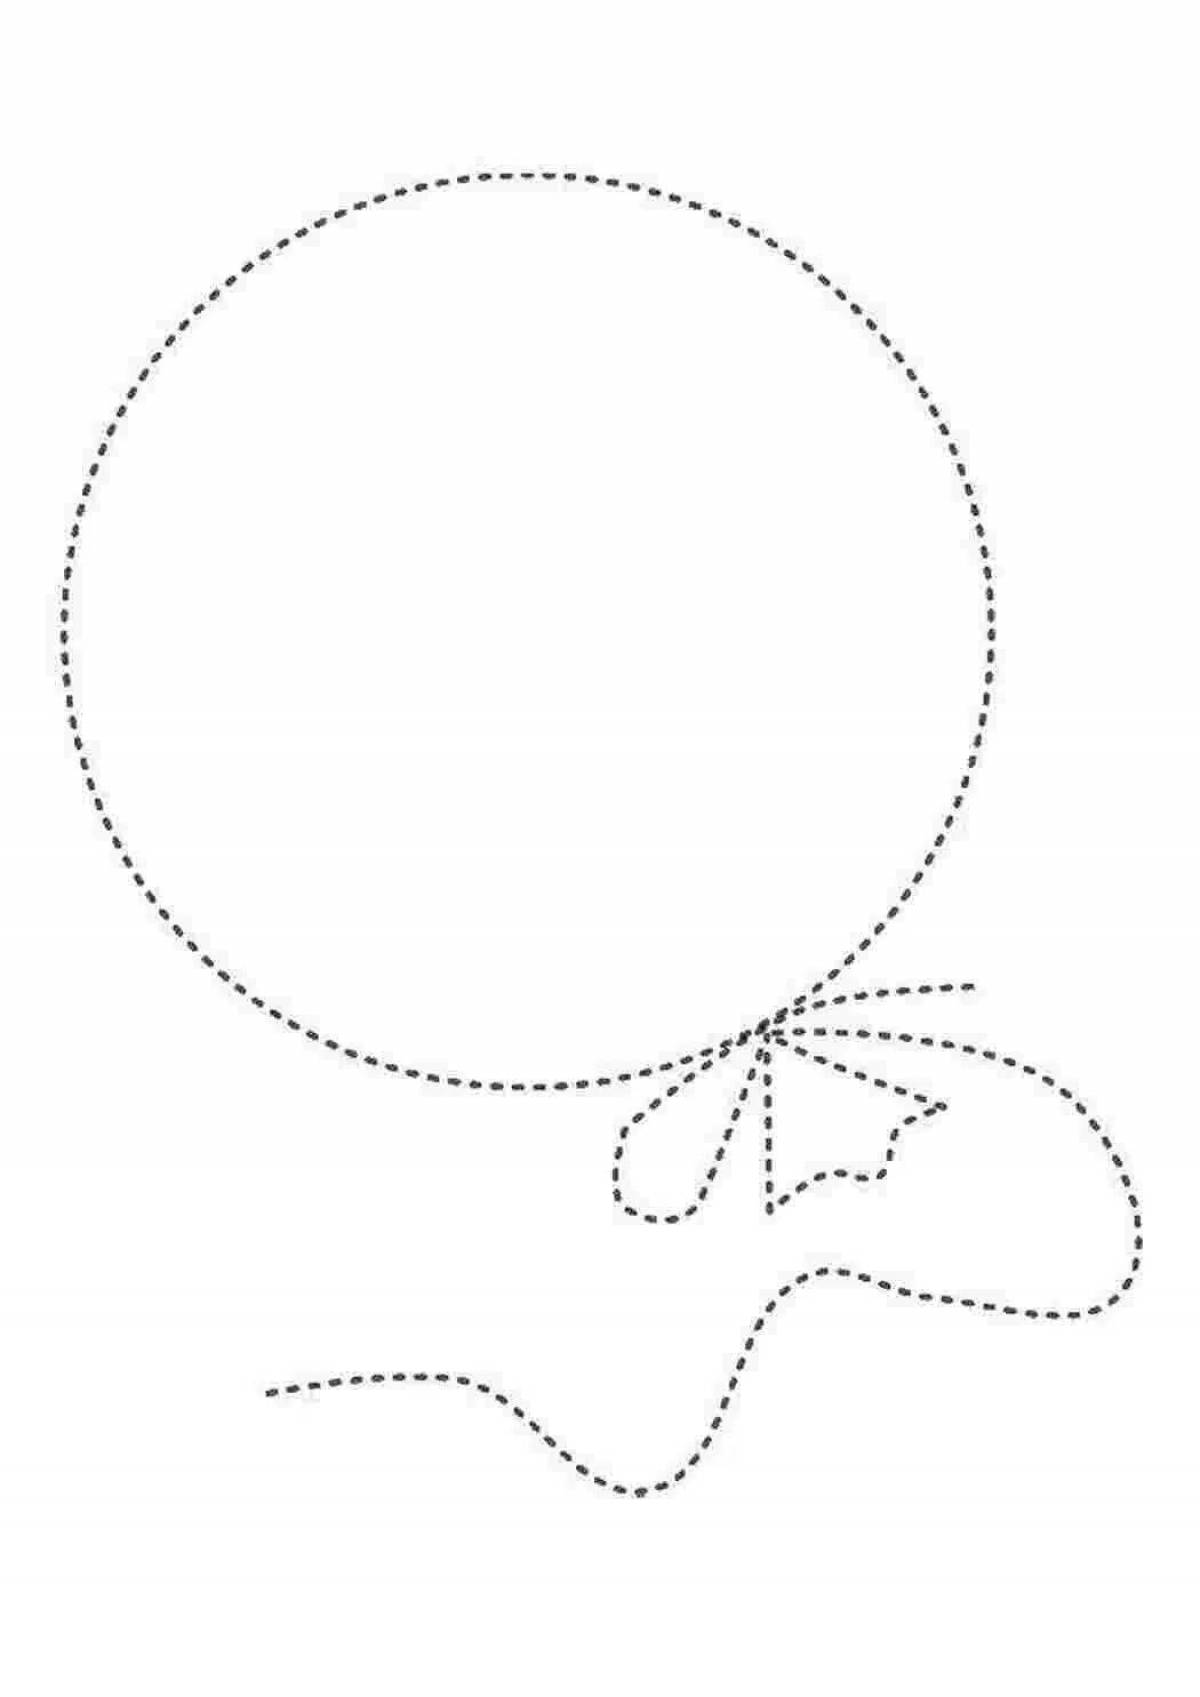 Adorable round lines create a coloring book